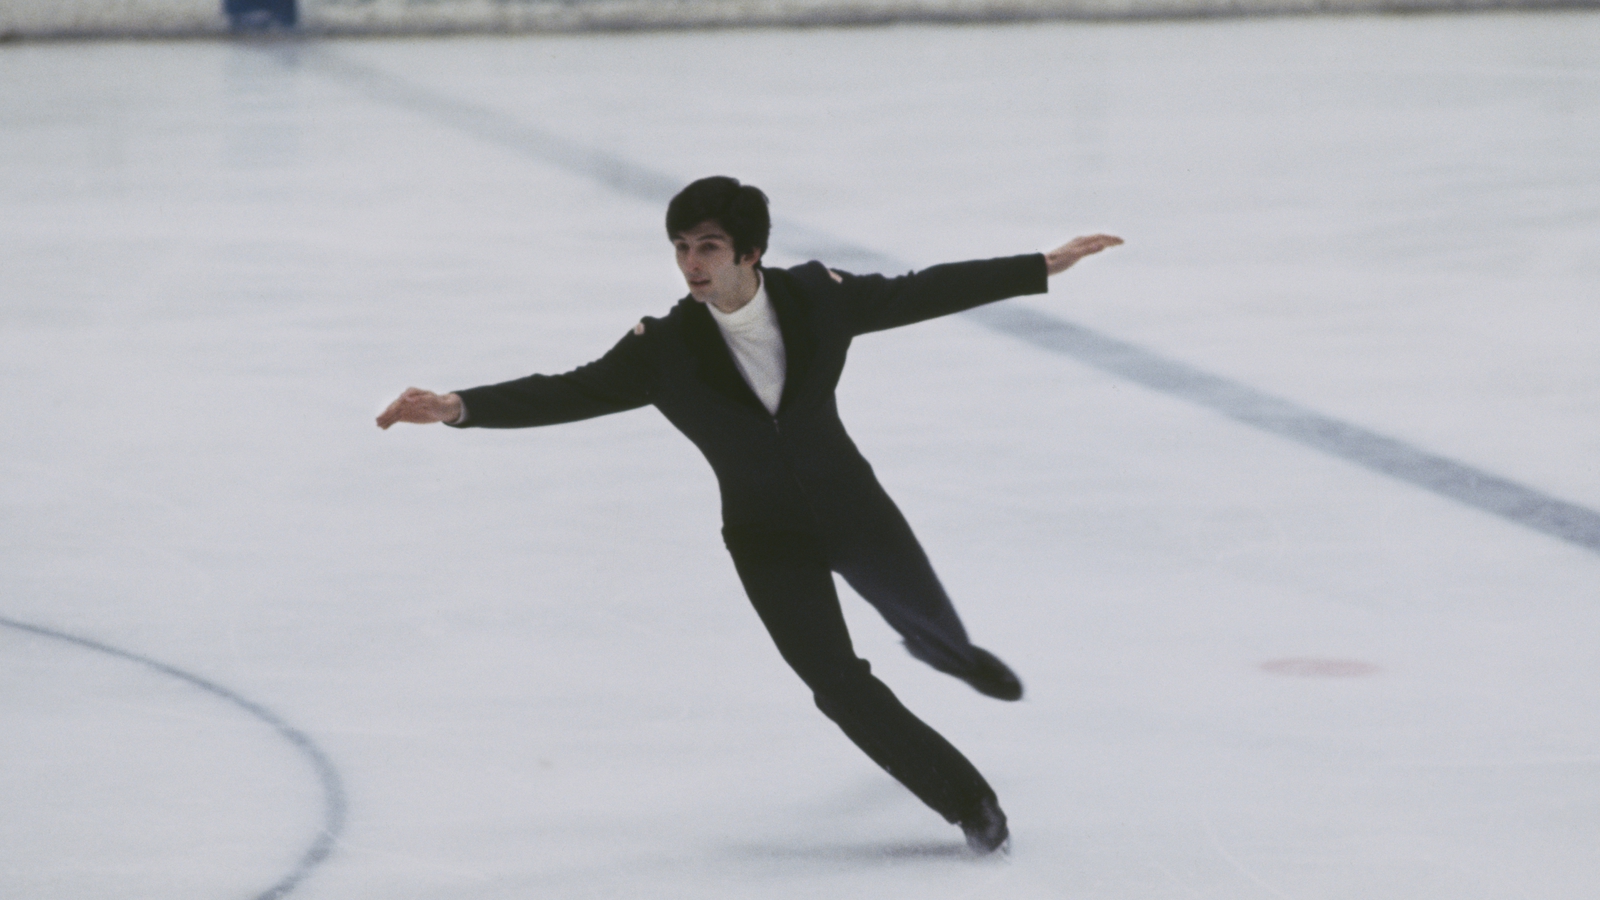 Image - Haig Oundjian competed for Britain as a figure skater in the Winter Olympics 50 years ago - he would go on to become chairman of Watford and co-chairman of Bruno's Magpies